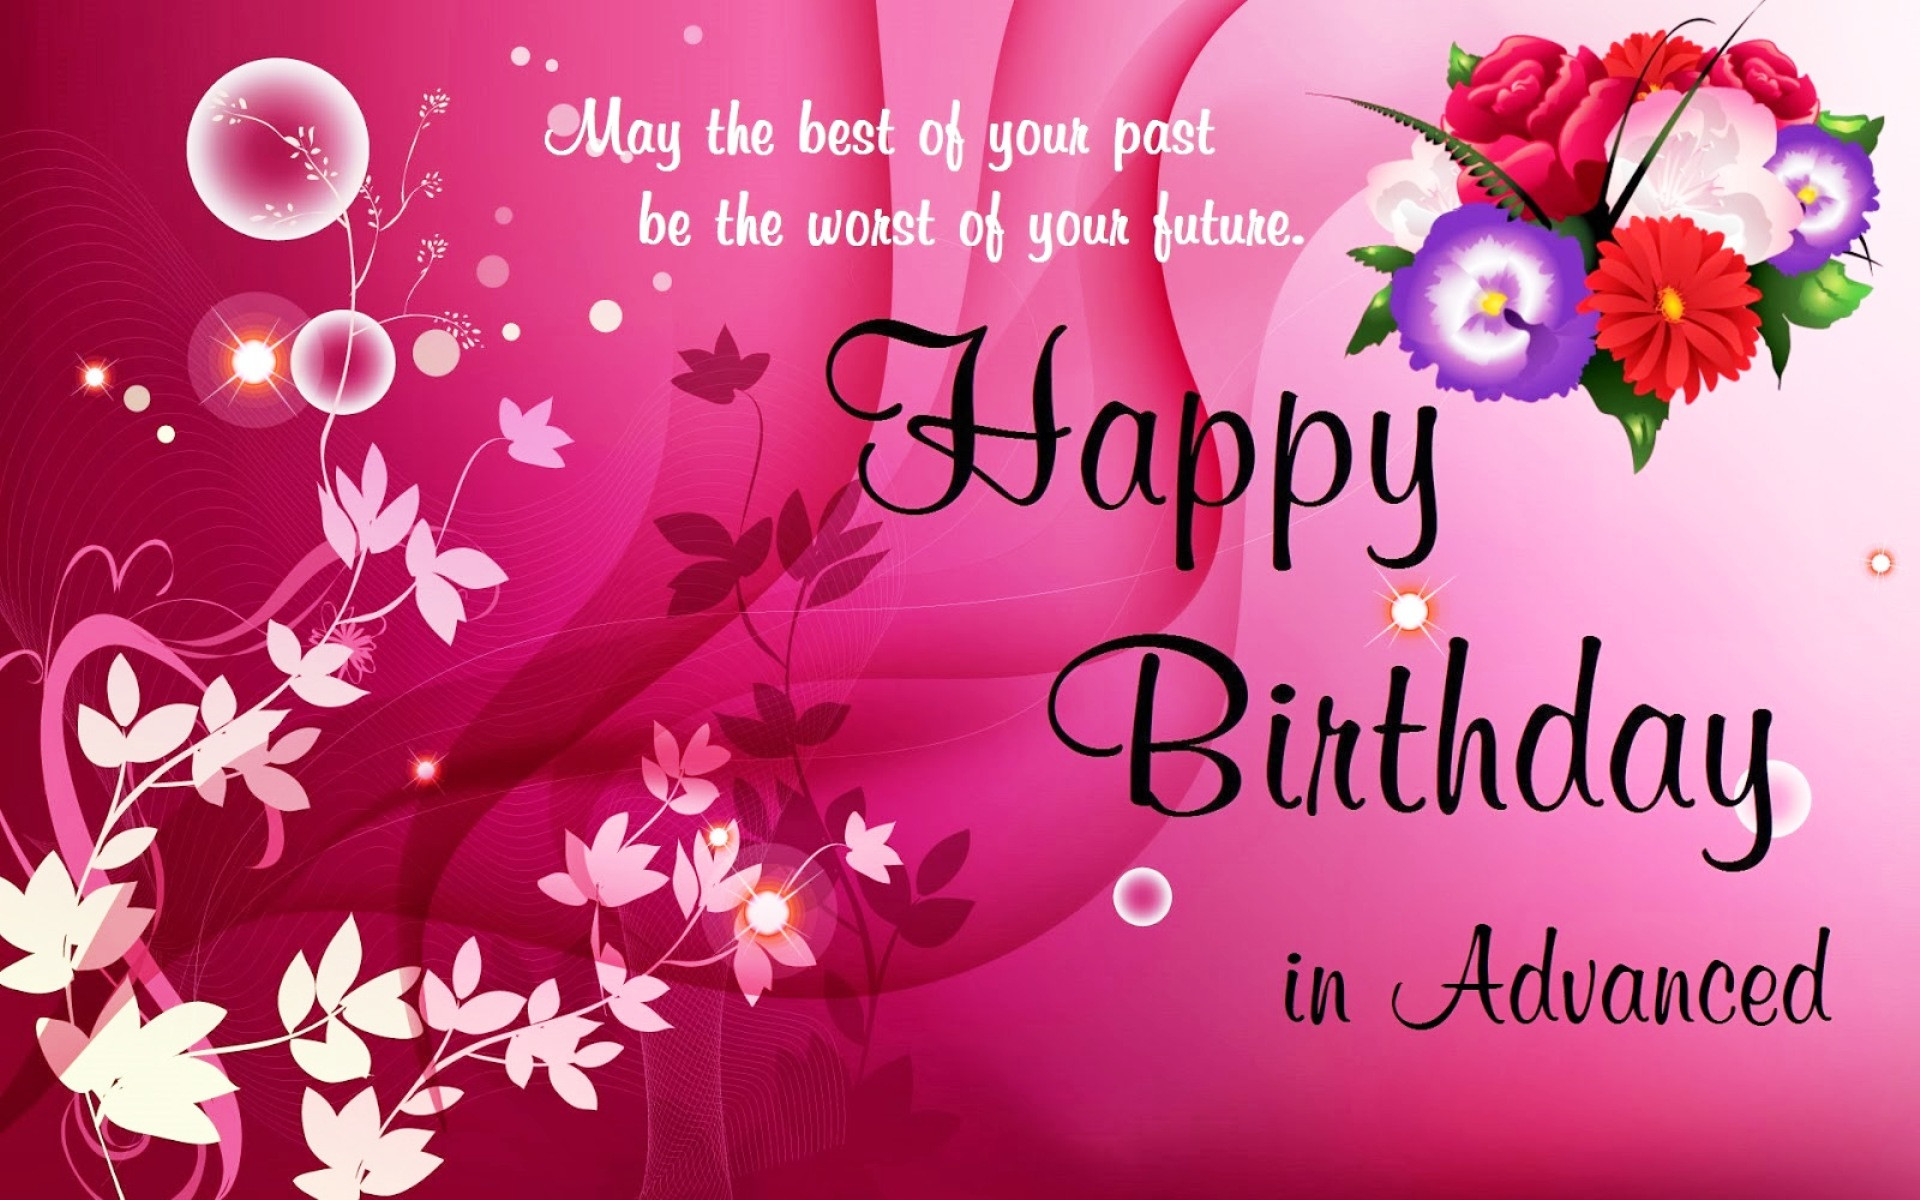 Heartfelt Birthday Wishes
 Heartfelt Birthday Wishes That Can Express Your Love to